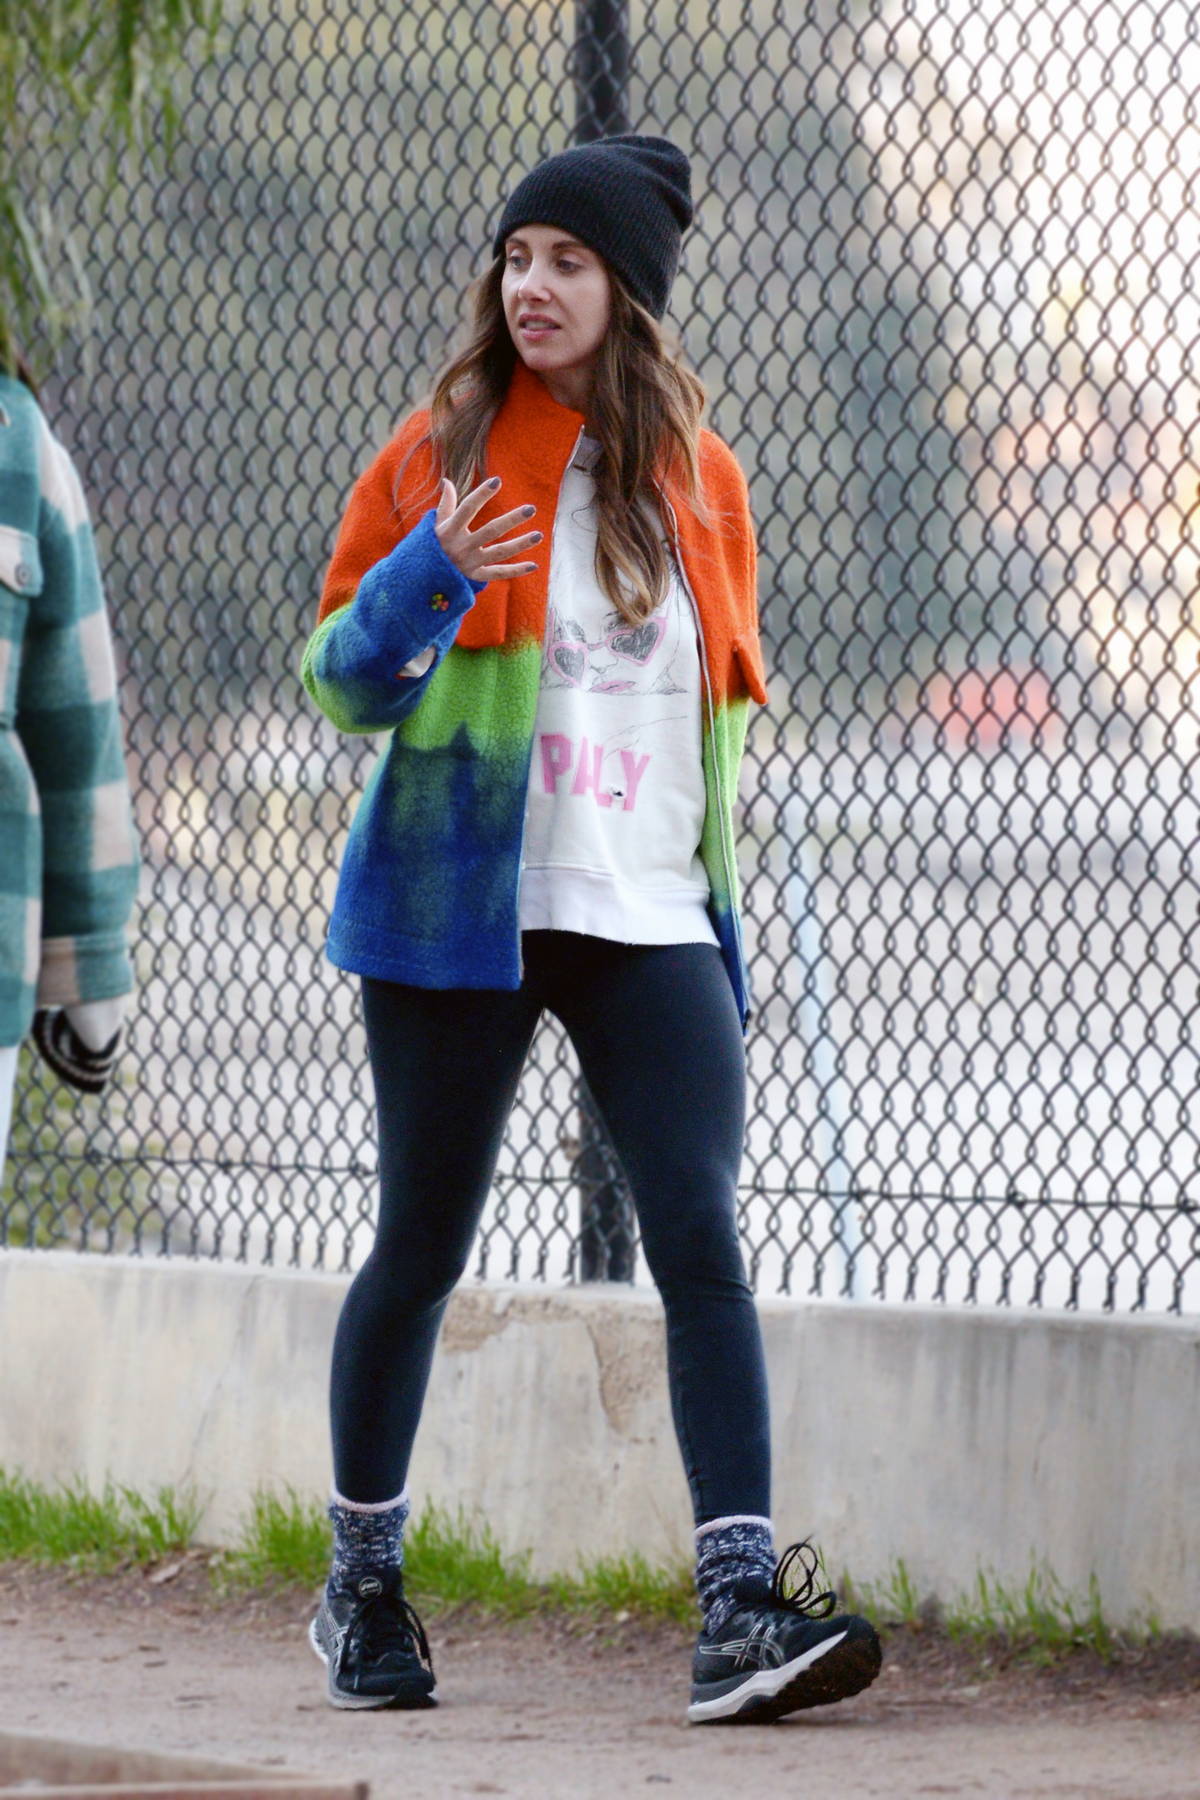 Alison Brie wears a colorful fleece and black leggings as she goes